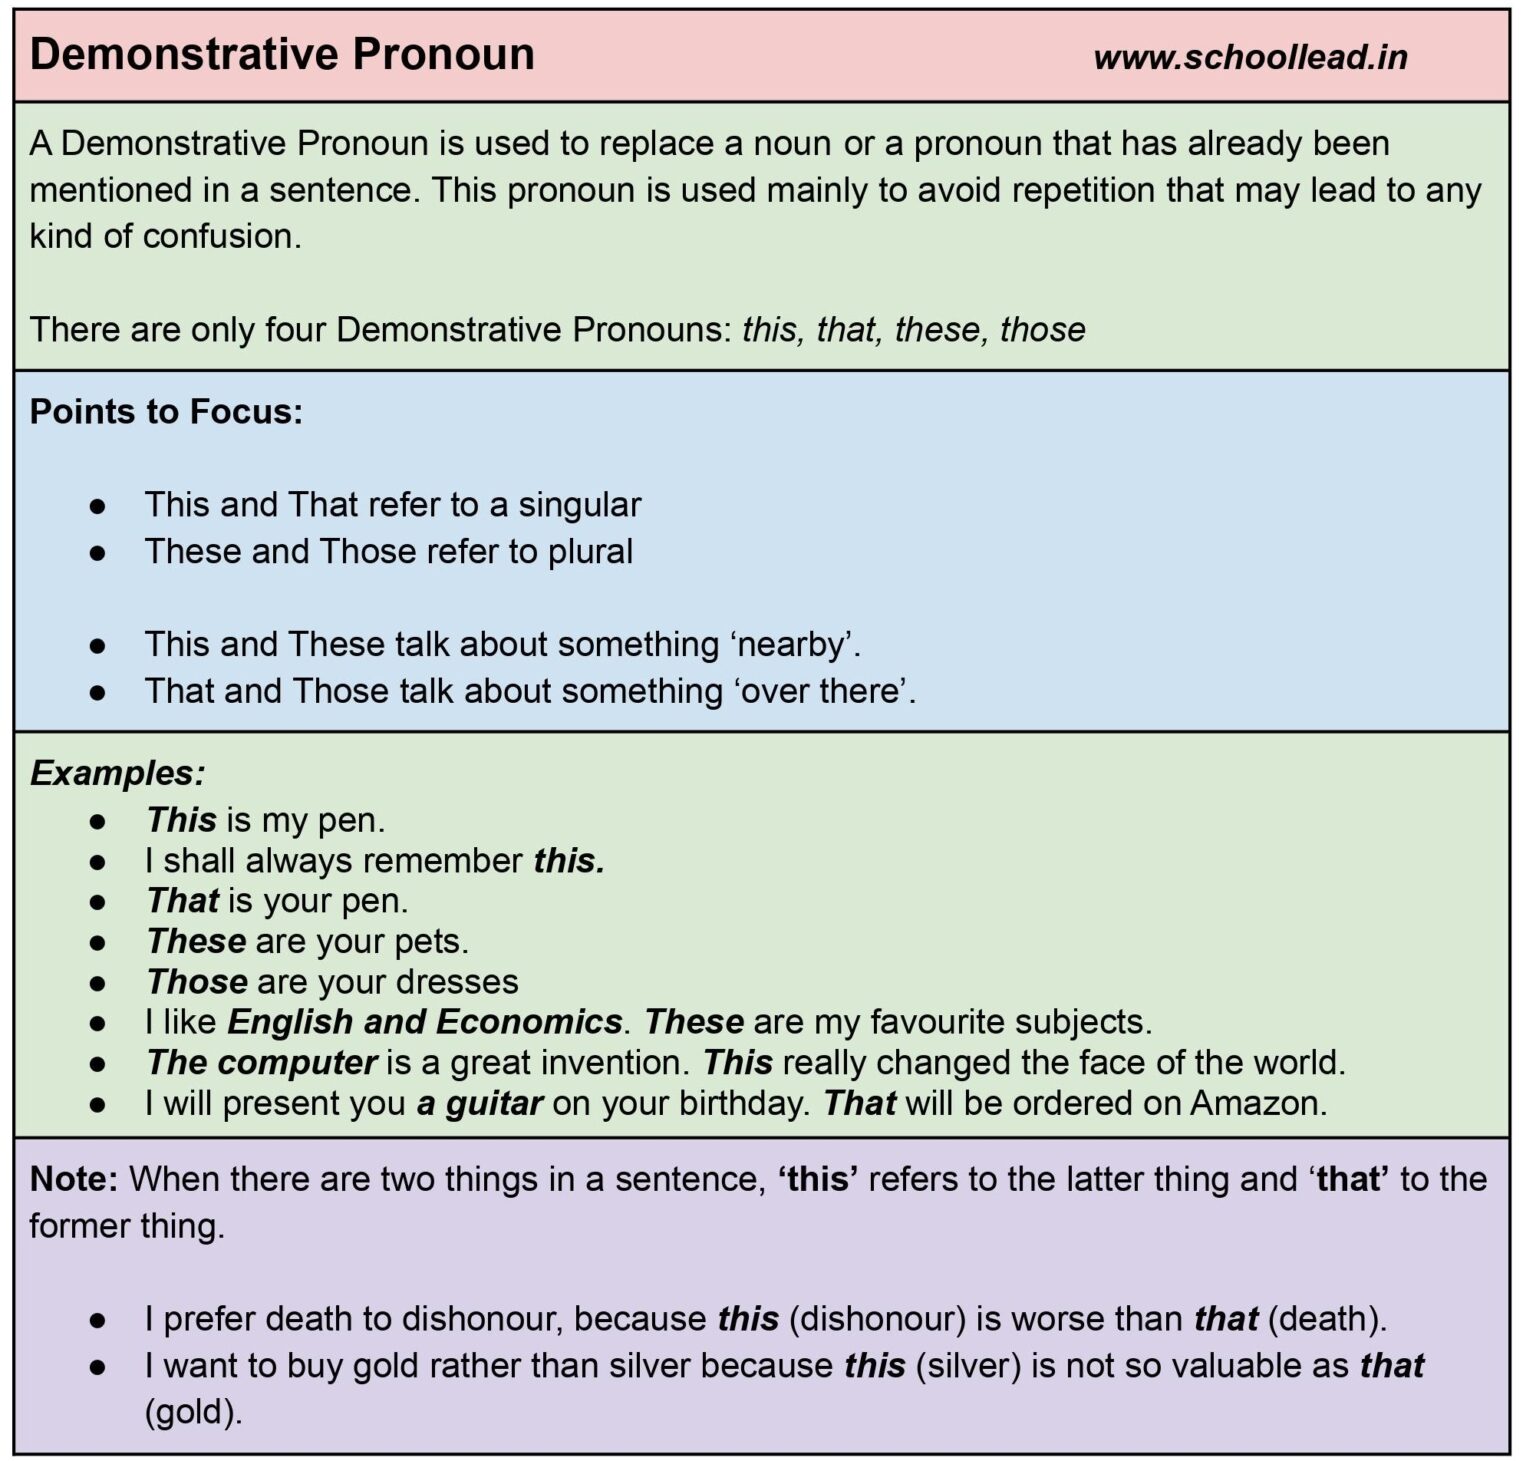 Demonstrative Pronouns Questions And Answers Archives School Lead